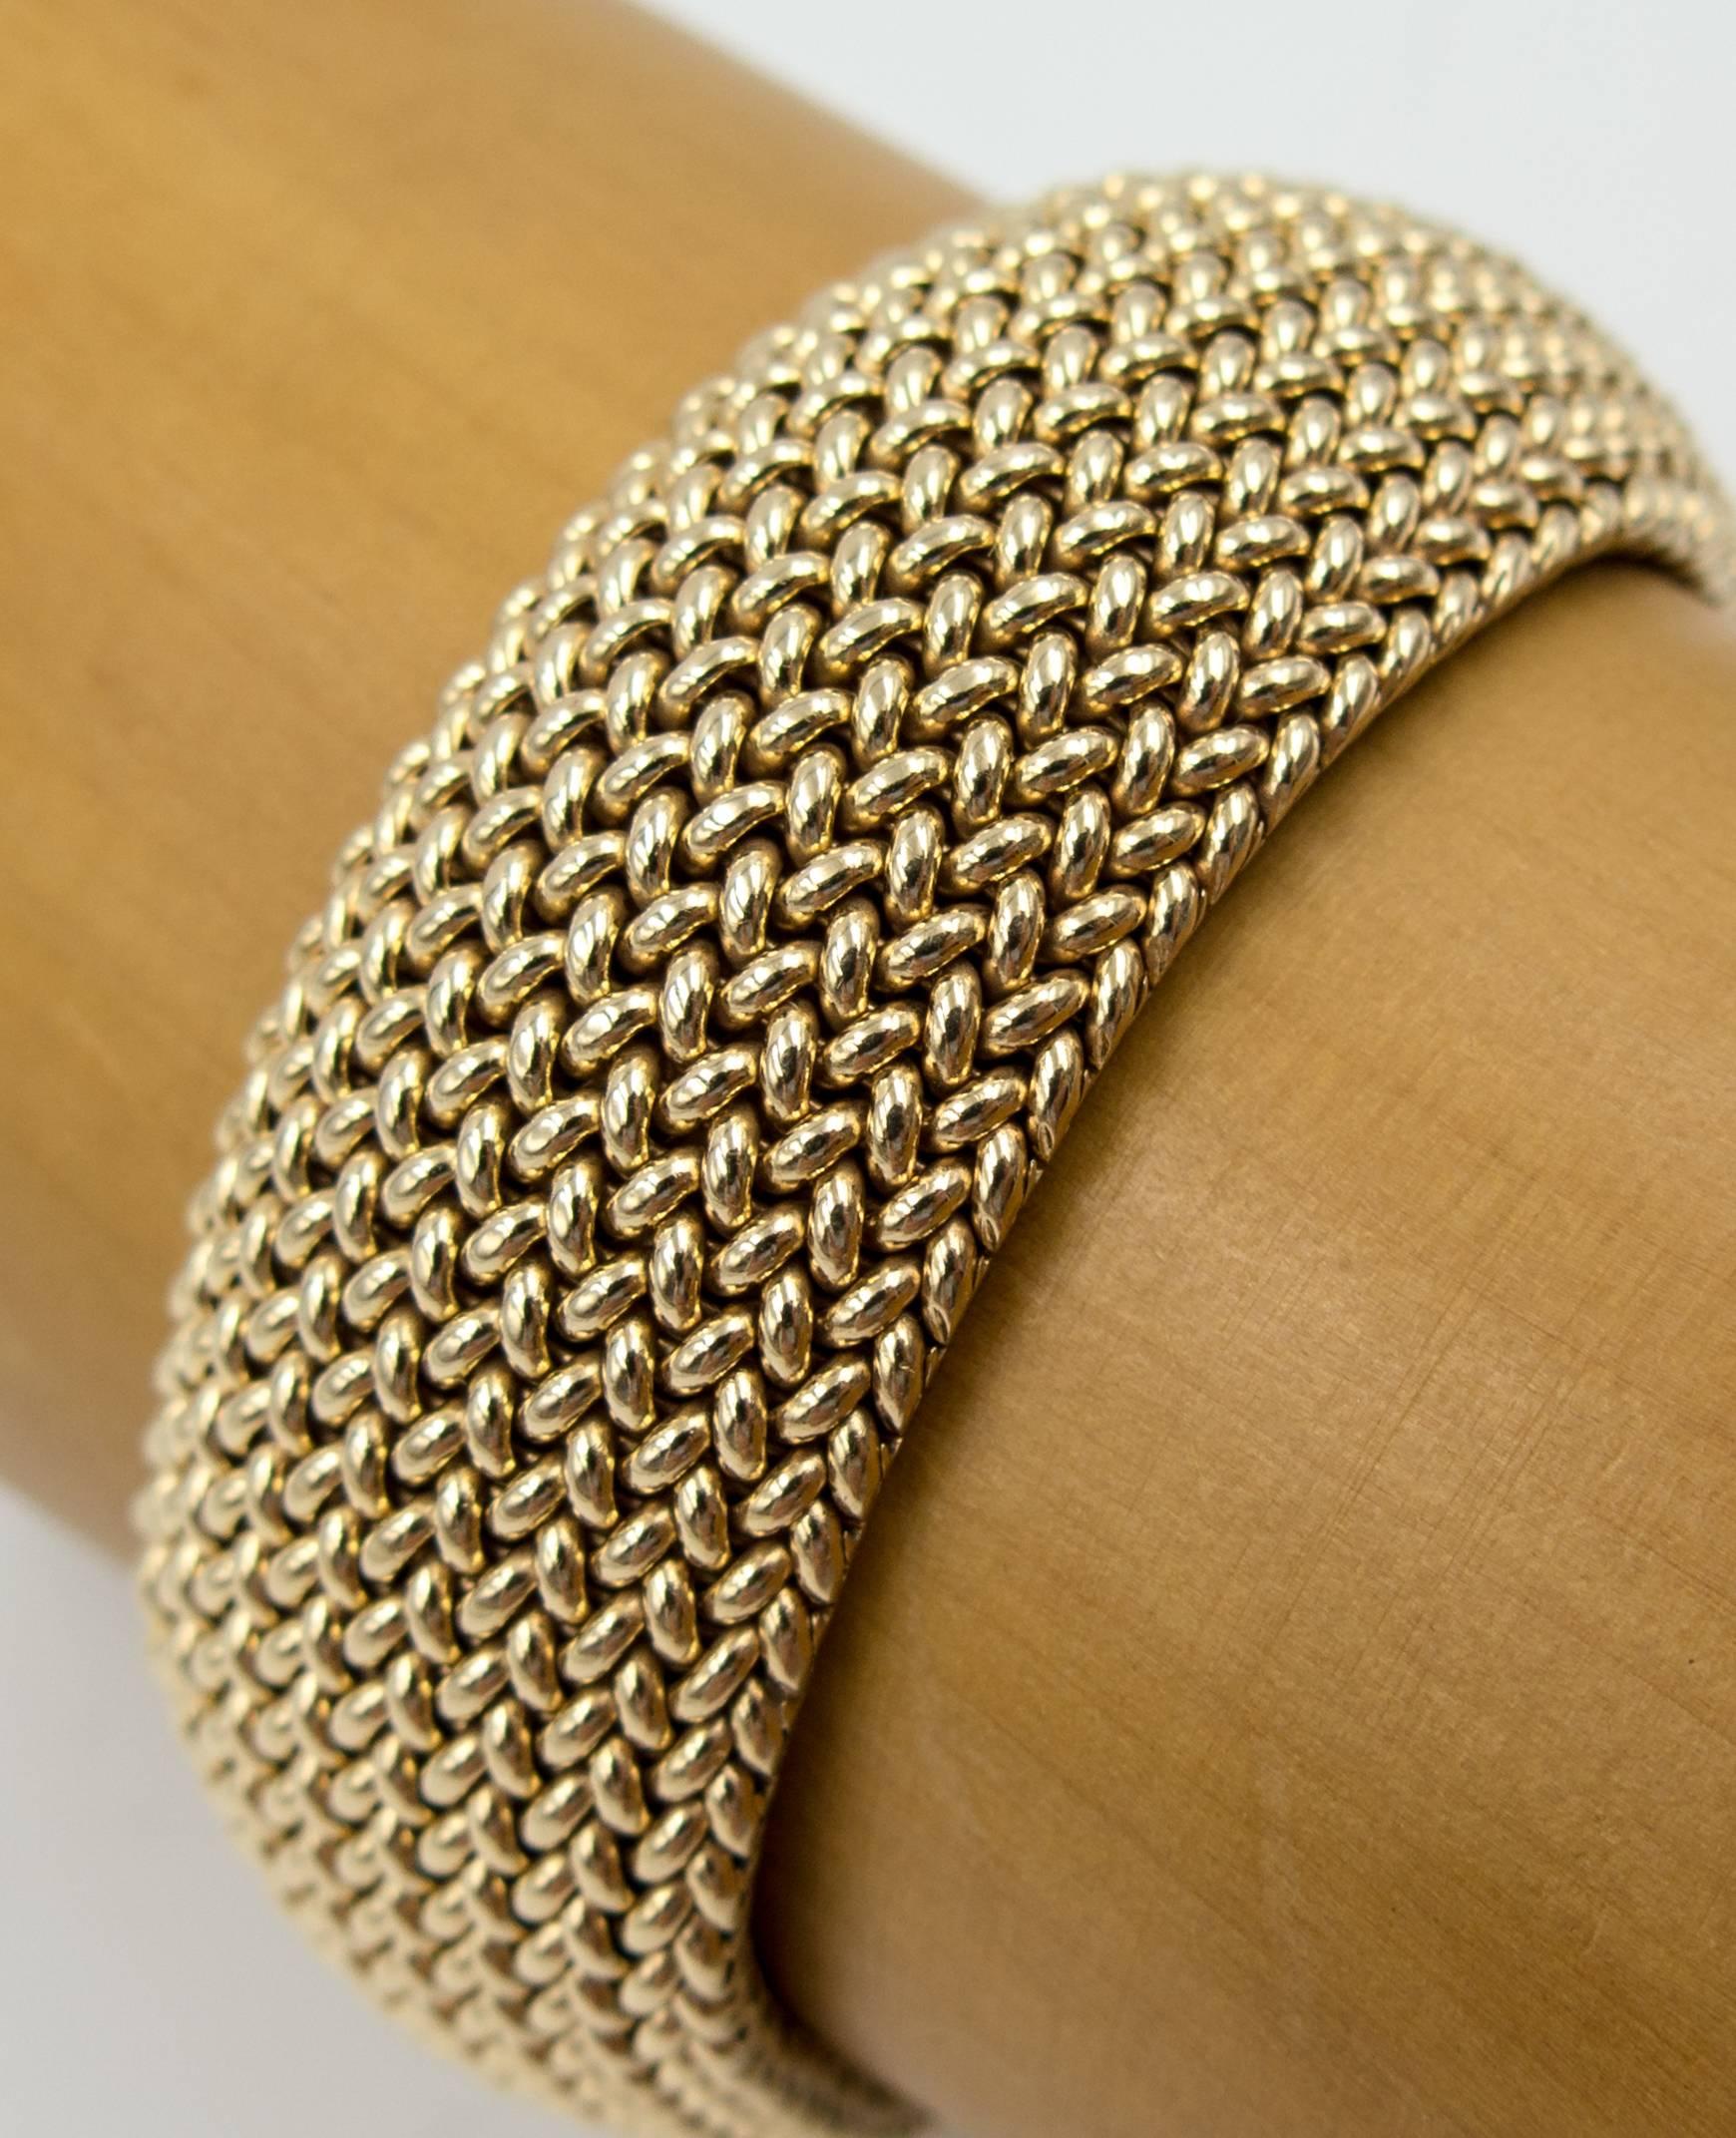 A timeless bracelet made of tiny interlocking braids of yellow gold that gracefully curve into a solid form as it's fastened onto the wrist.  It measures 7 1/2 inches in length ( slightly longer than the average size bracelet) and is 7/8" wide.